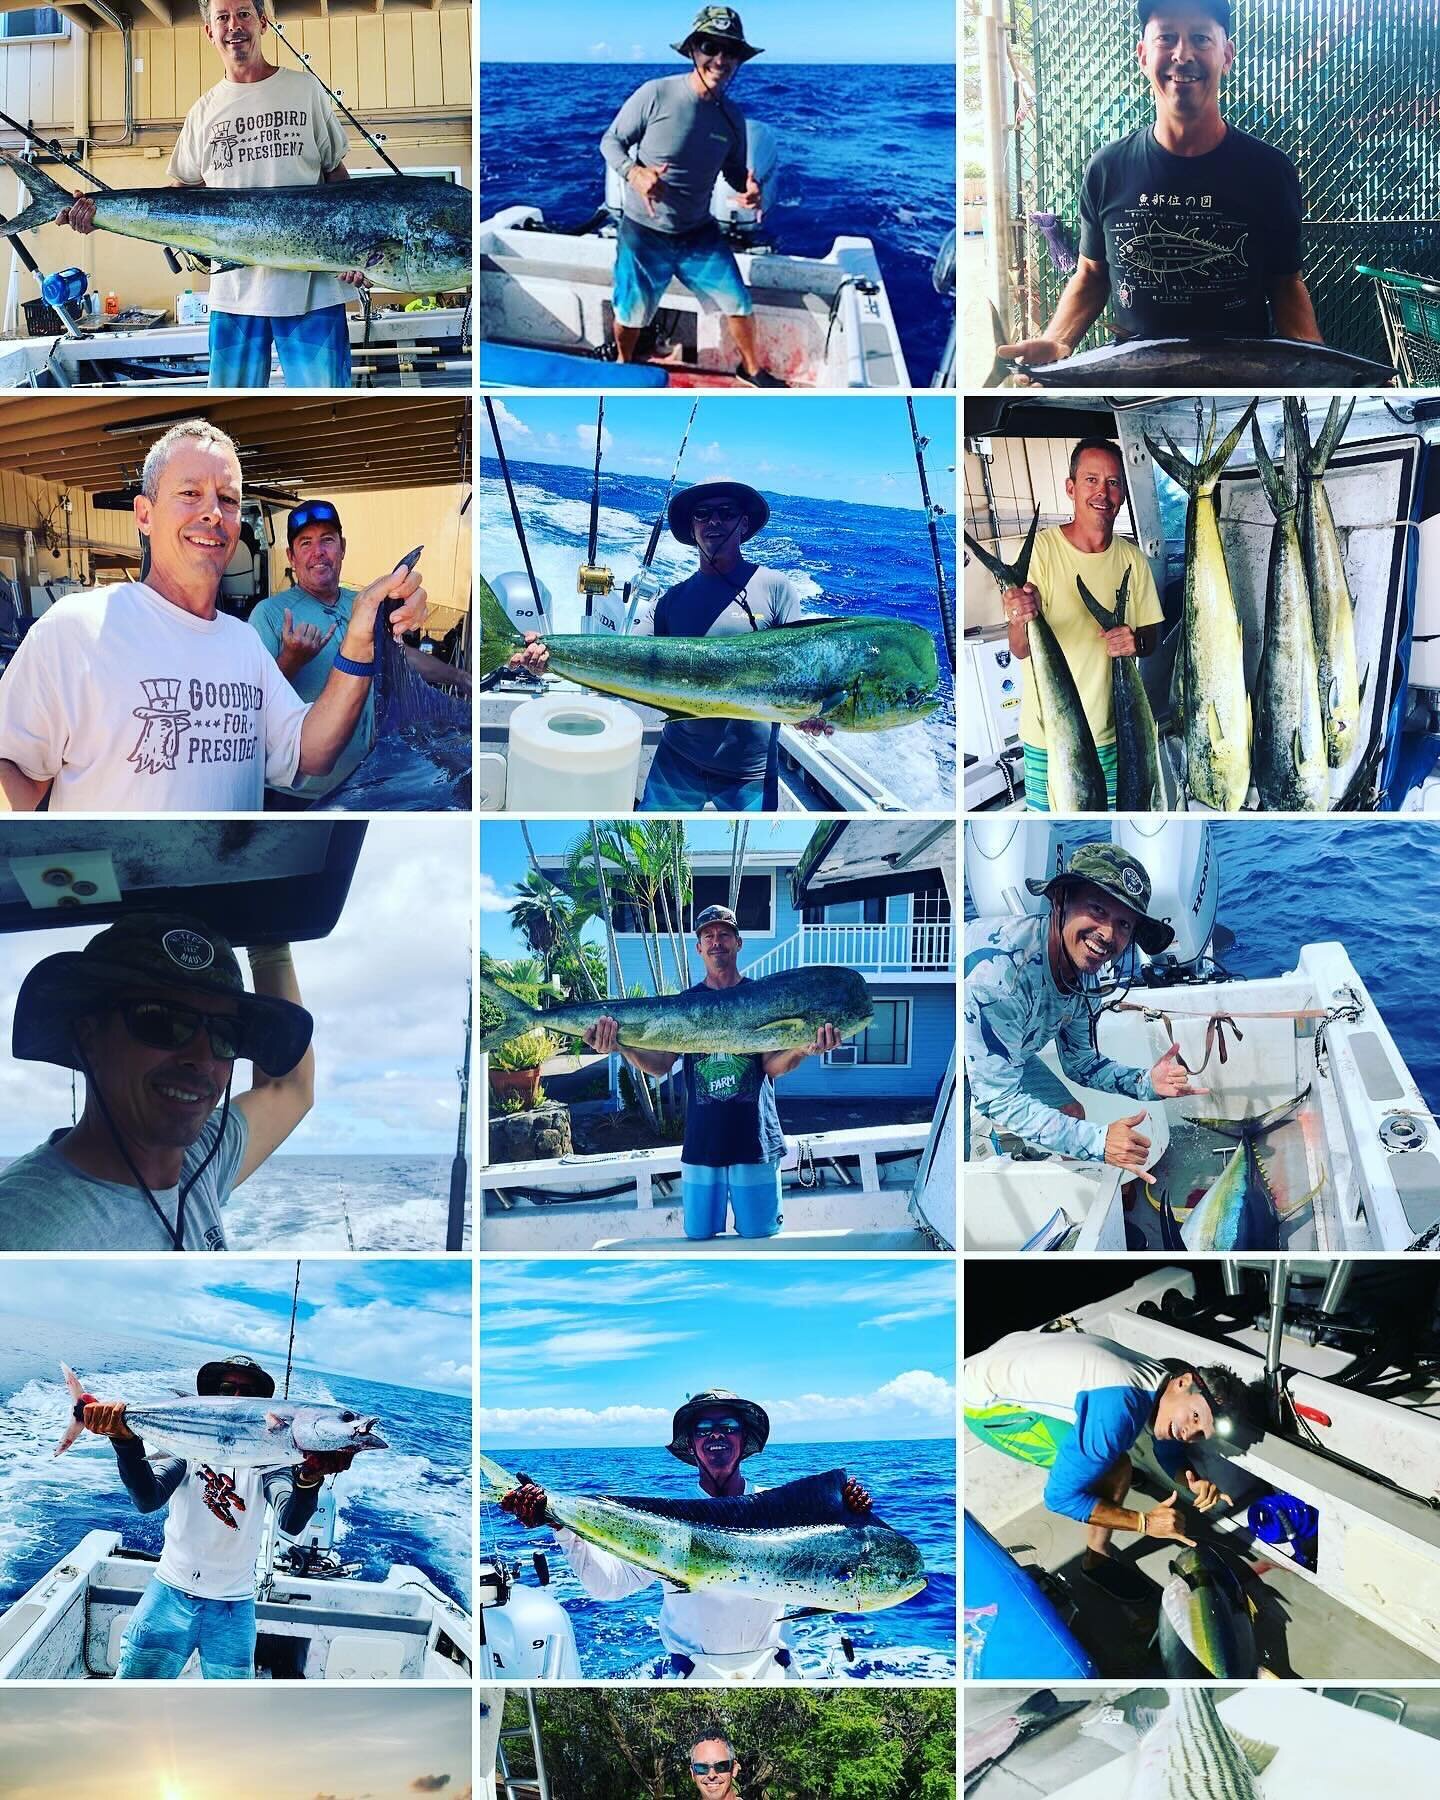 A little throwback from some of my fishing memories. Feeling the need to go.
#oceanlife #oceanlover #fisherman #fishing #fishinglife #deepblue #pacicificocean #angler #fish #eatlocal #eats #cheflife #Hawaii #mauichef